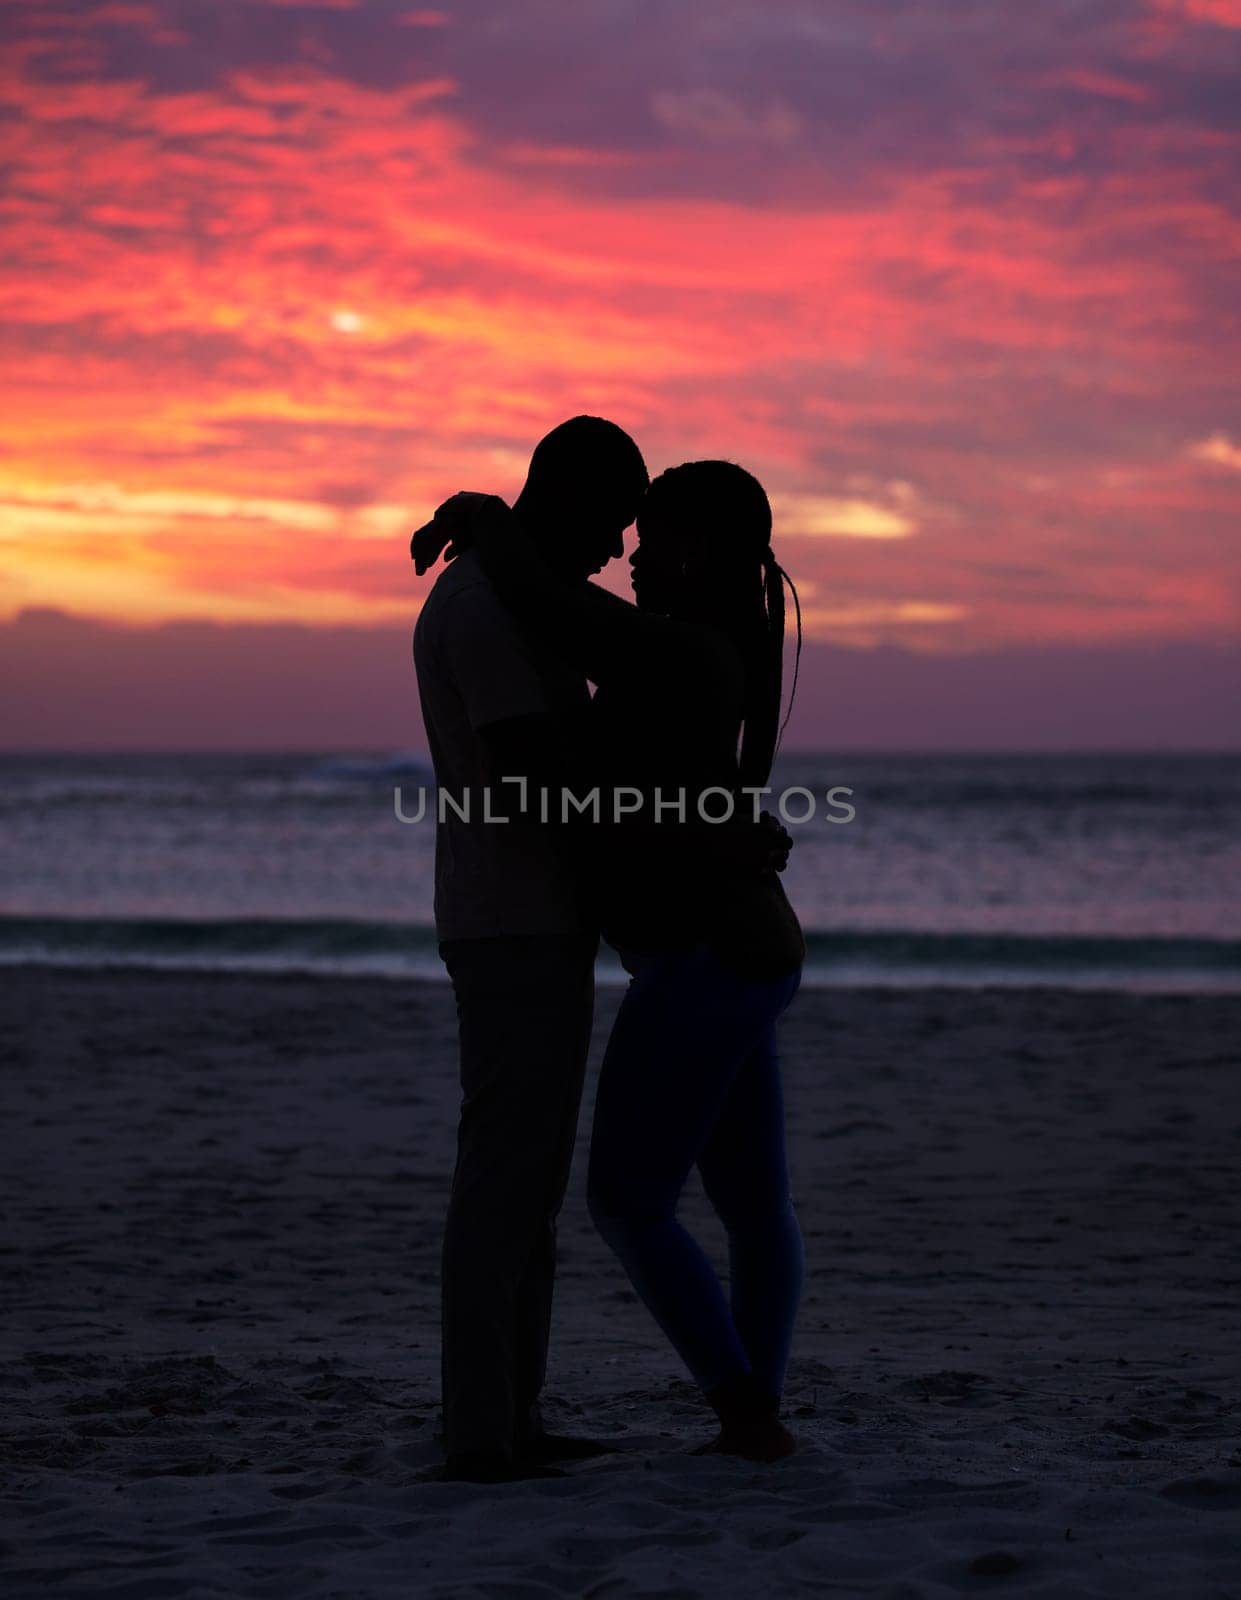 Couple, sunset and silhouette outdoor at the beach with love, care and commitment. Romantic man and woman hug or affectionate on vacation, holiday or nature travel adventure with sunrise sky on date.